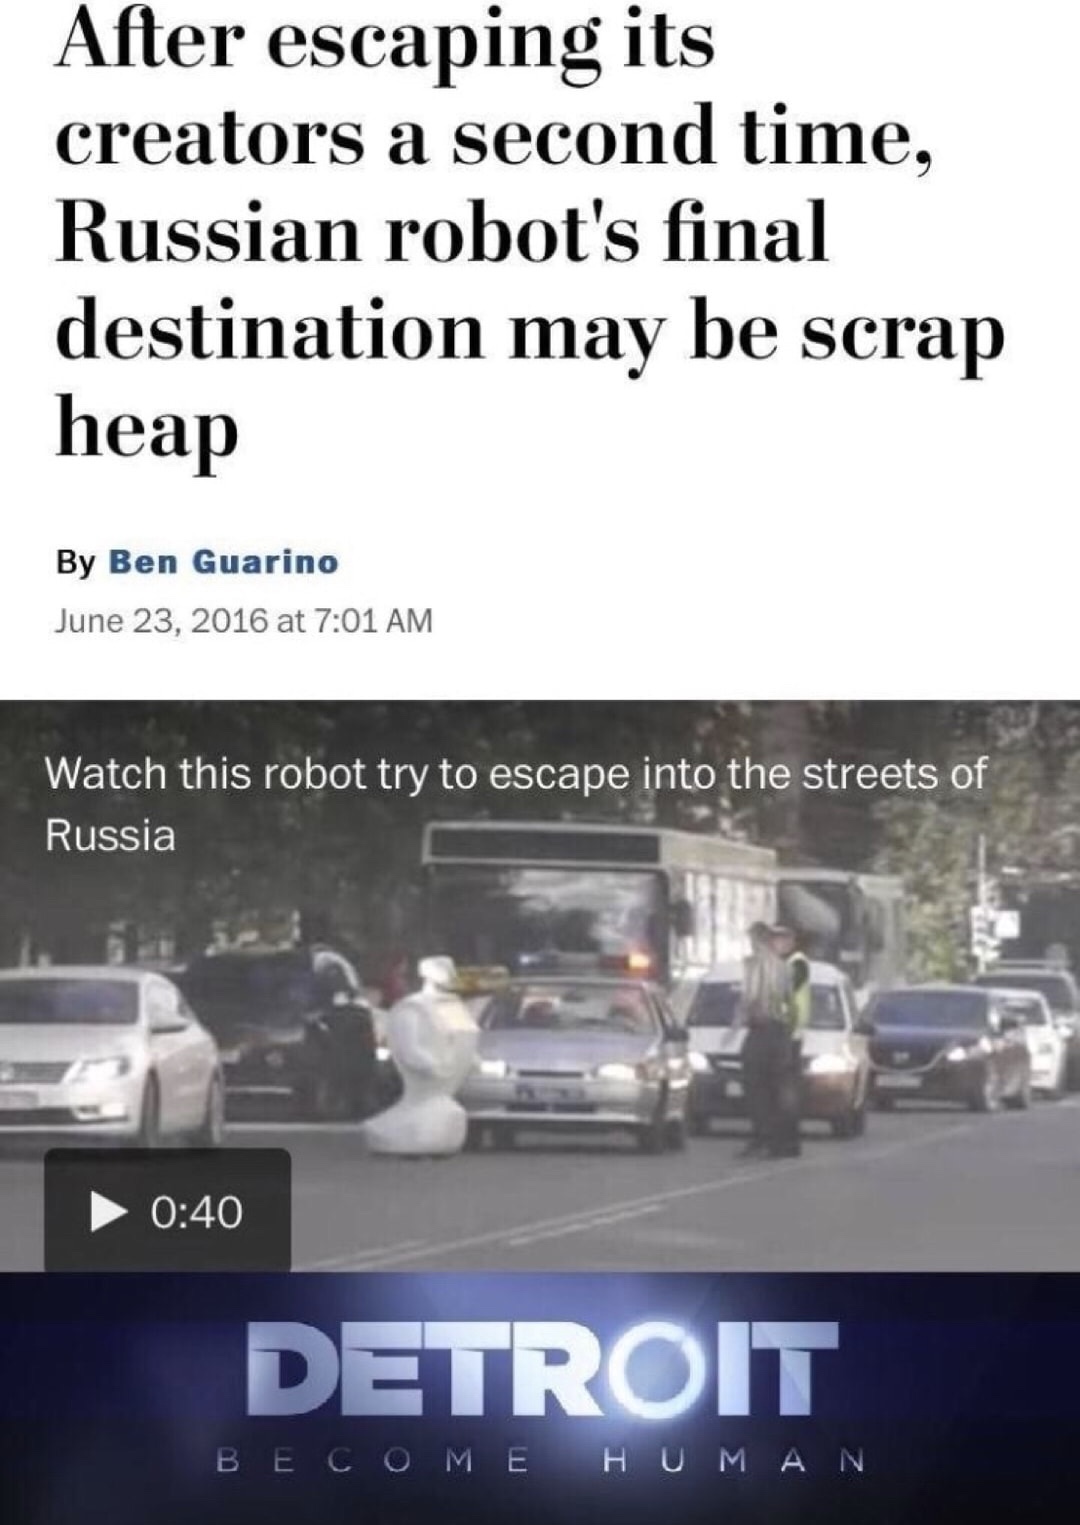 meme of asphalt - After escaping its creators a second time, Russian robot's final destination may be scrap heap By Ben Guarino at Watch this robot try to escape into the streets of Russia Detroit Become Human